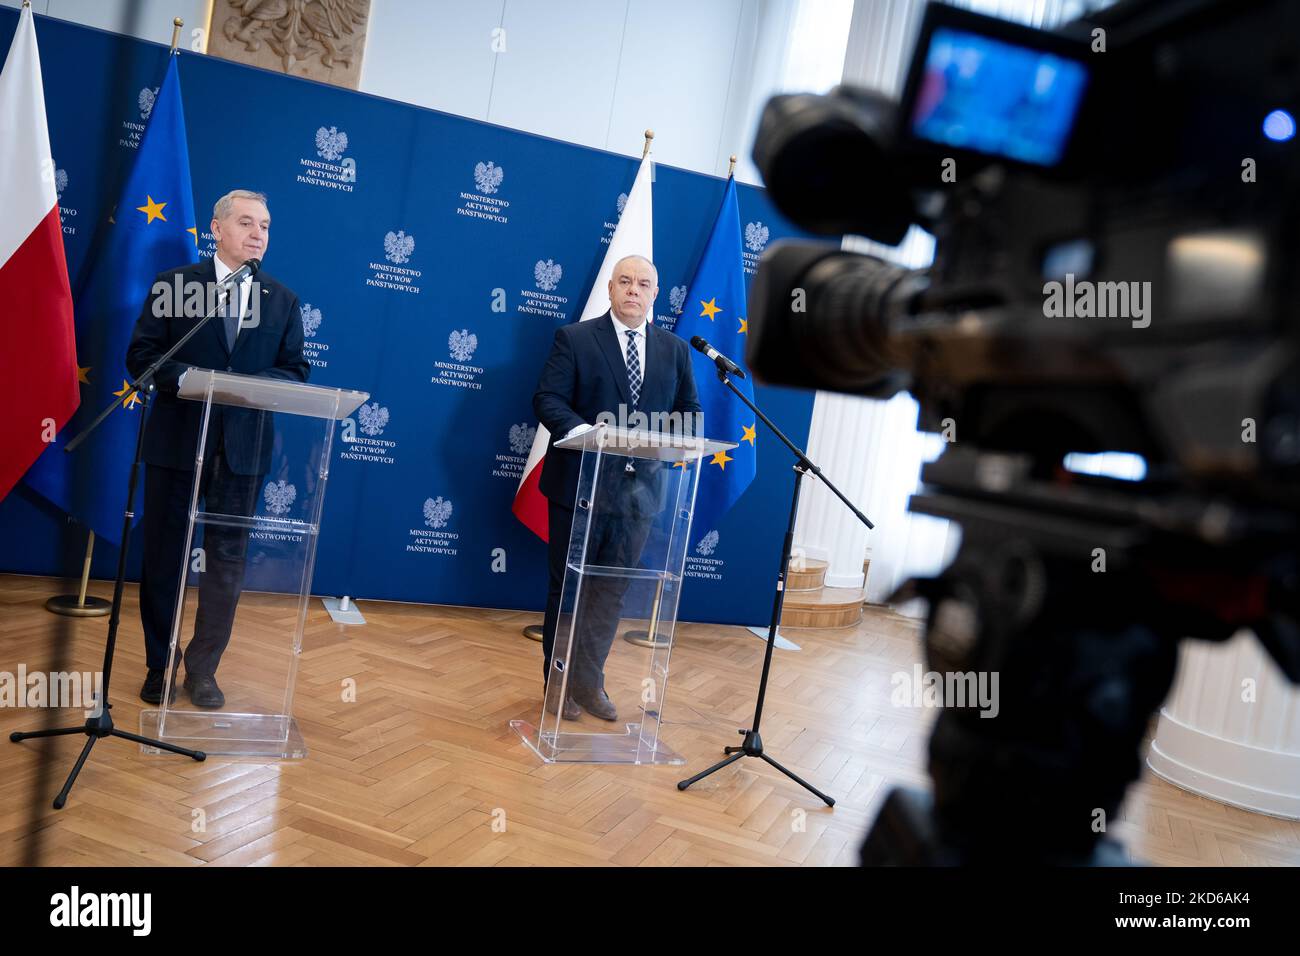 Polish Minister of Agriculture Henryk Kowalczyk and Minister for State Assets Jacek Sasin during a joint press conference on state-owned Food Holding Company in Warsaw, Poland on March 29, 2022 (Photo by Mateusz Wlodarczyk/NurPhoto) Stock Photo